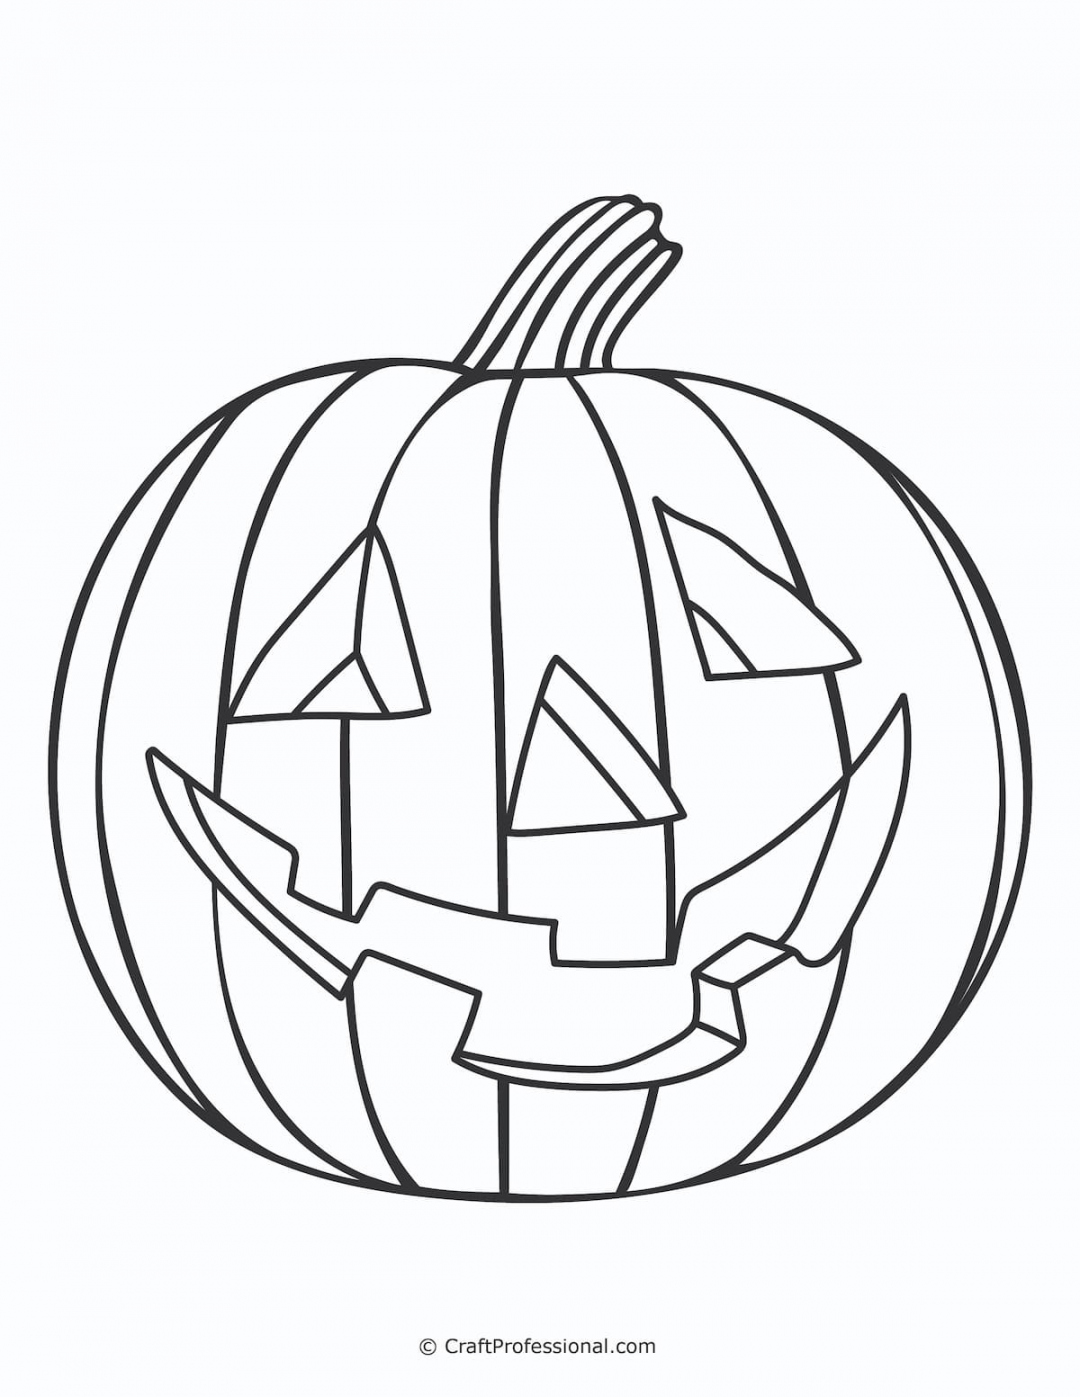 Pumpkin Coloring Pages - Free Printables for Kids & Adults to Color - FREE Printables - Free Printable Pumpkin Coloring Pages